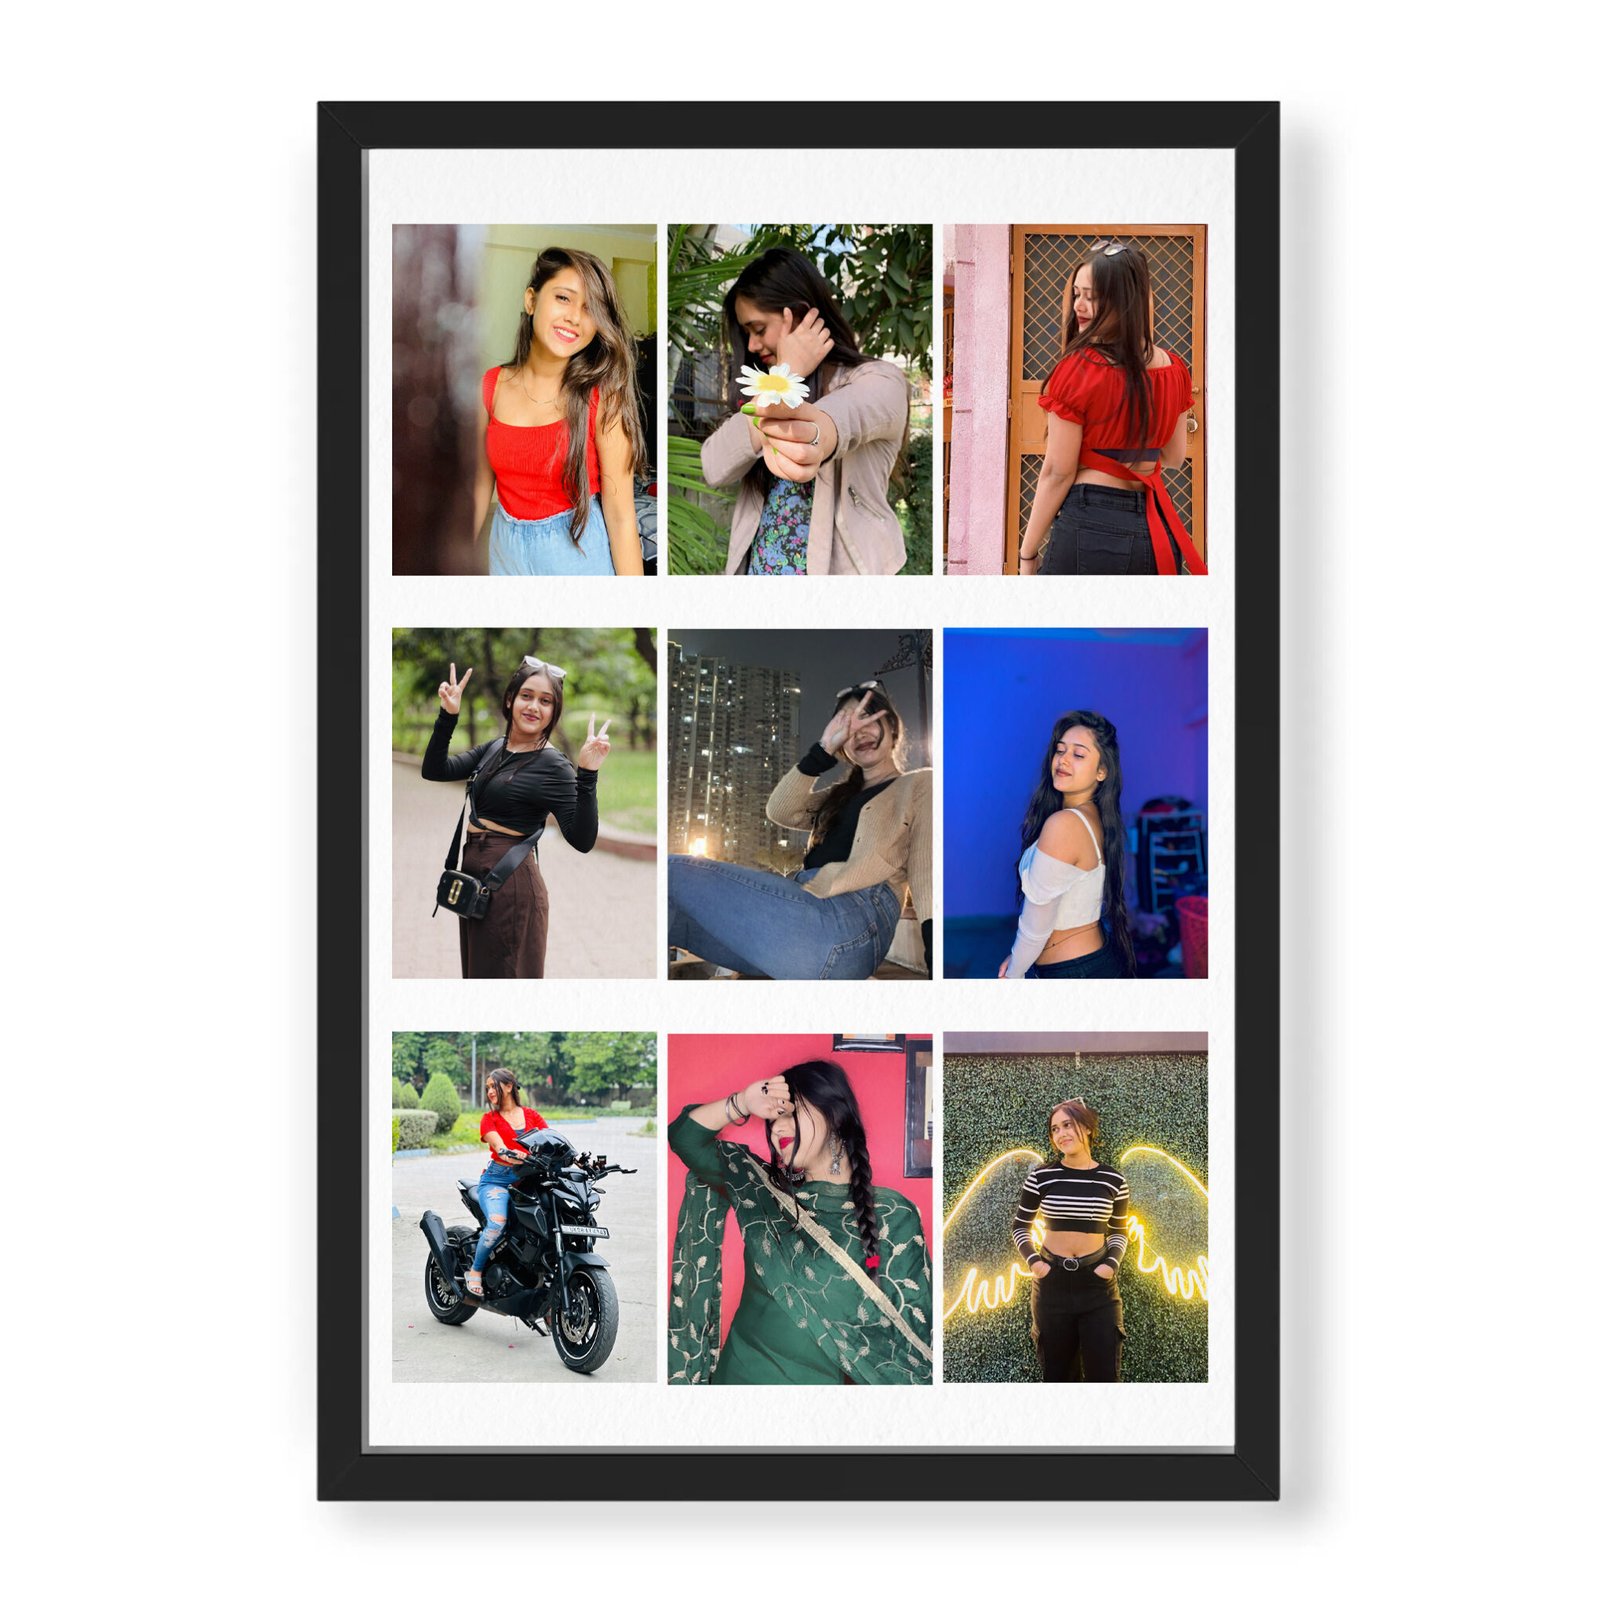 Customised Photo Collage with 9 Photos